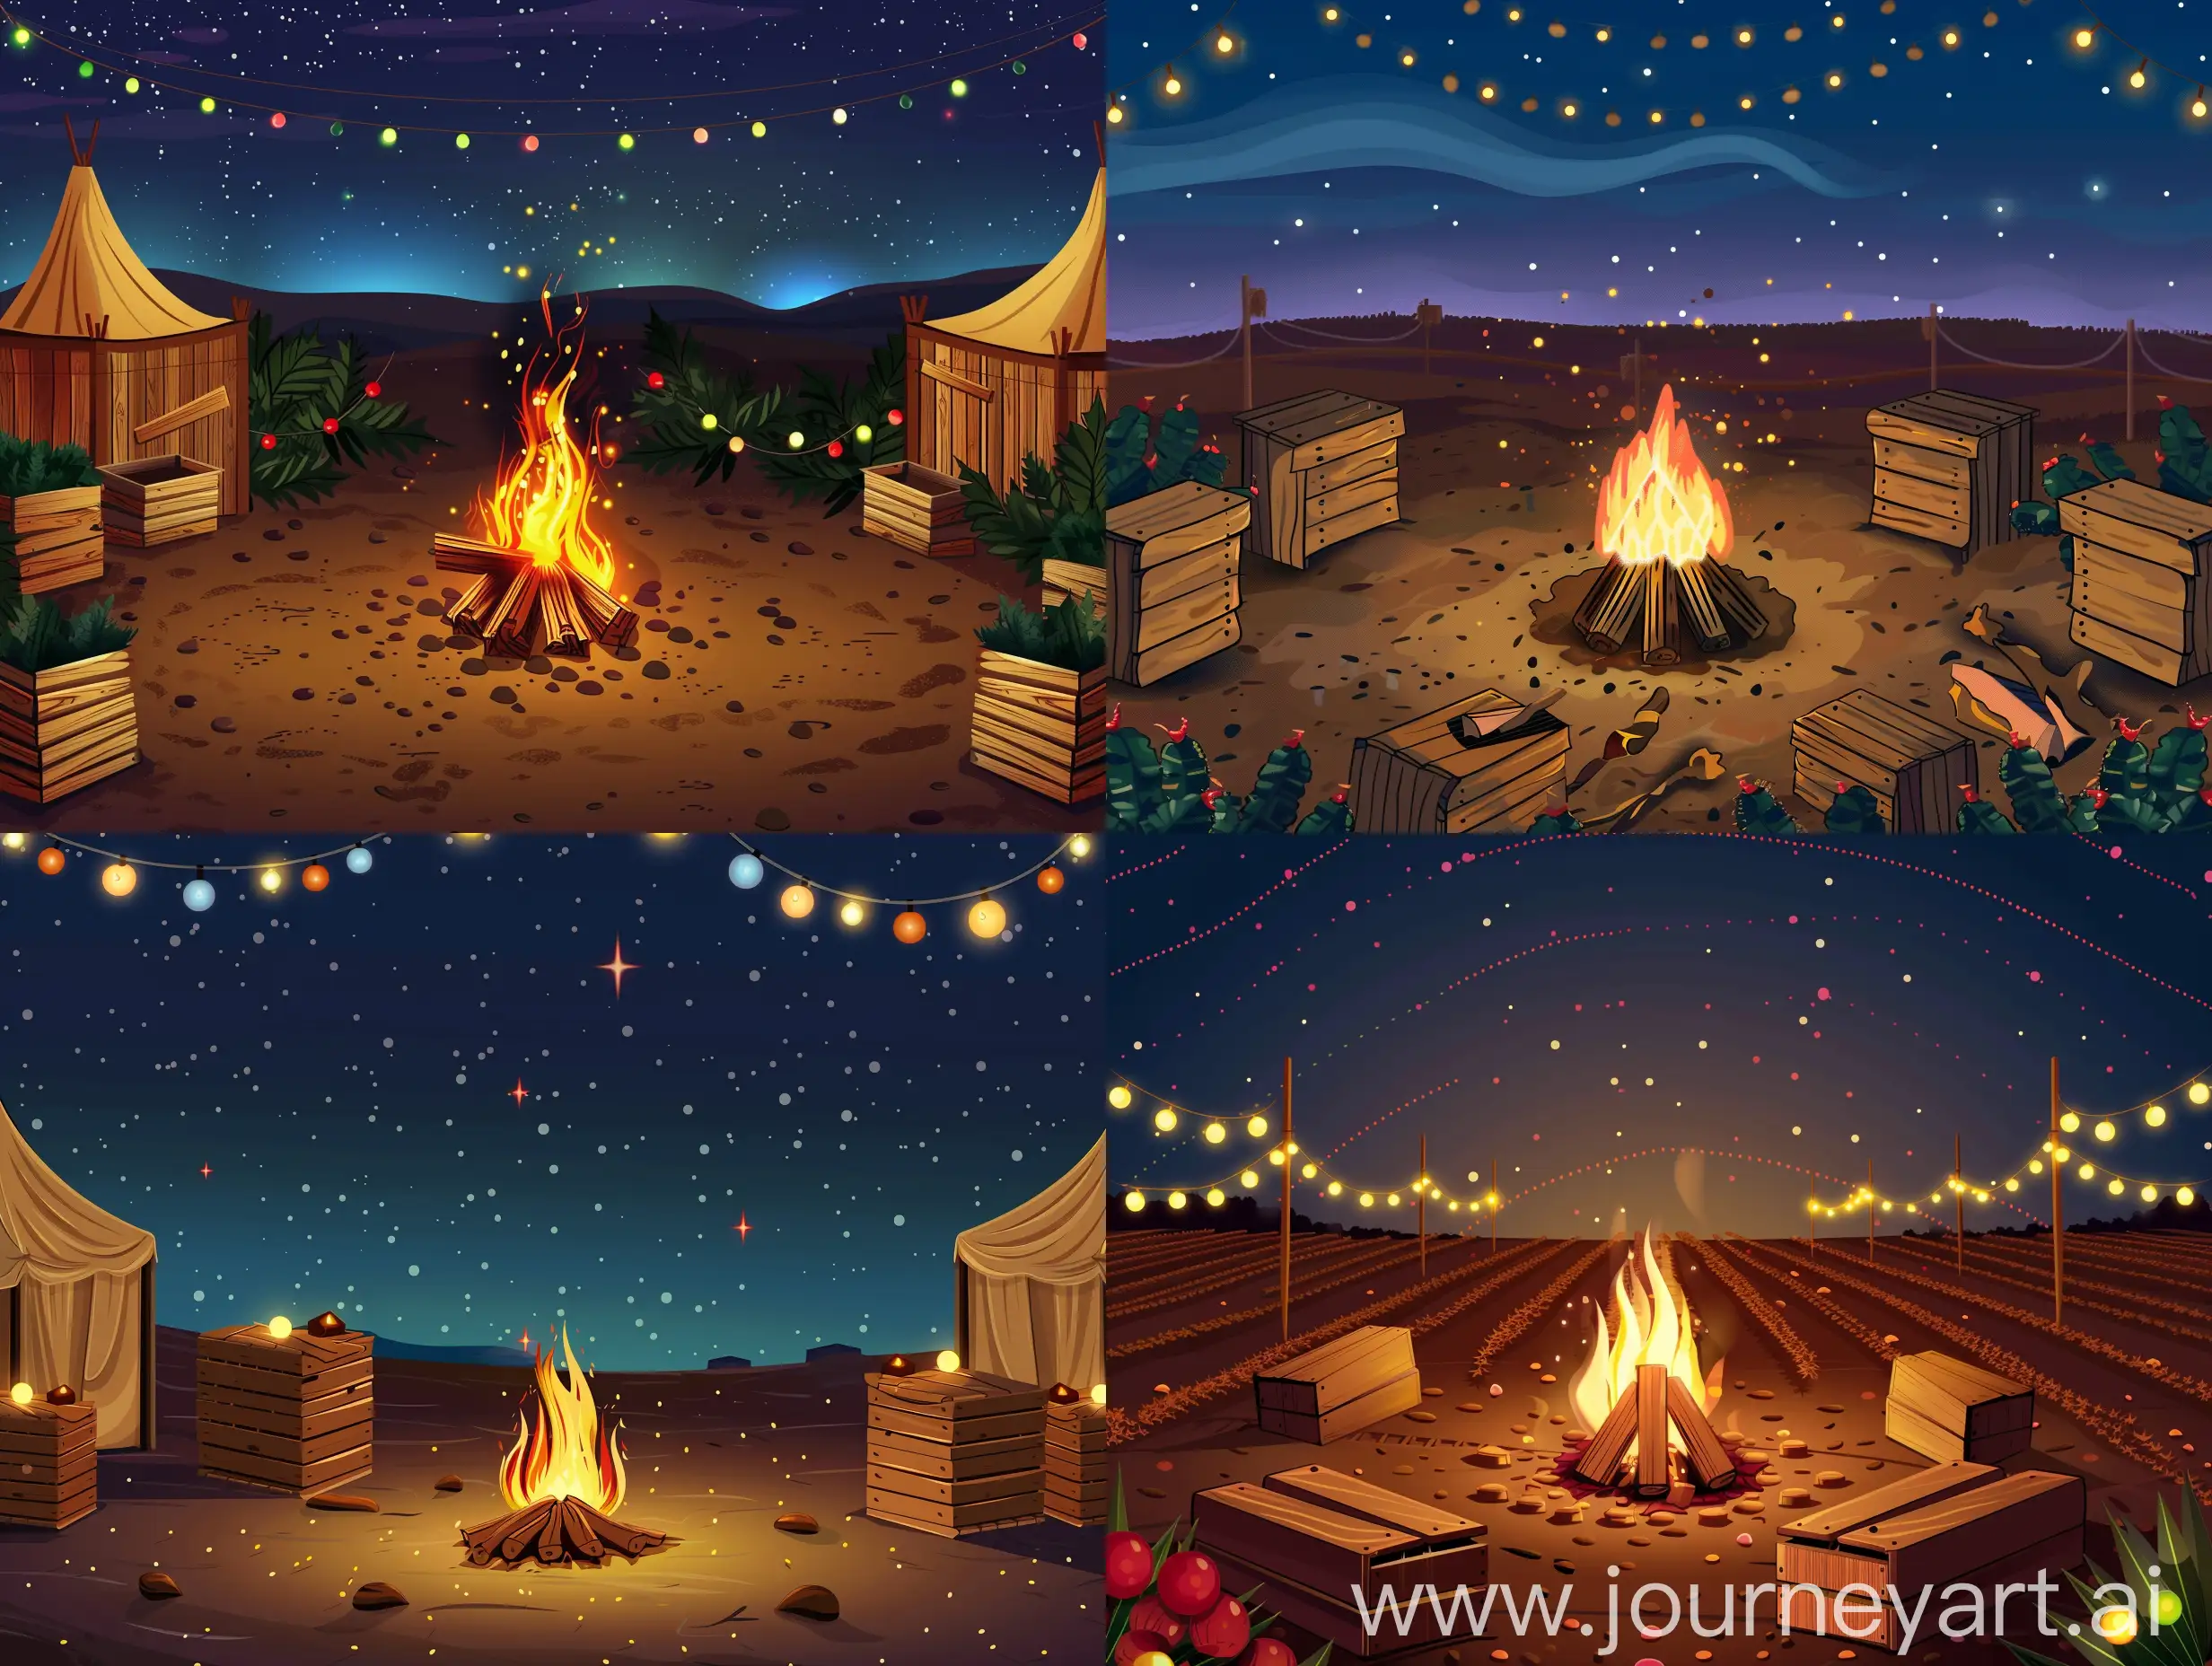 vector illustration small campfire by night without sprakles on an arable land, with wooden crates surrounded and lights decorated